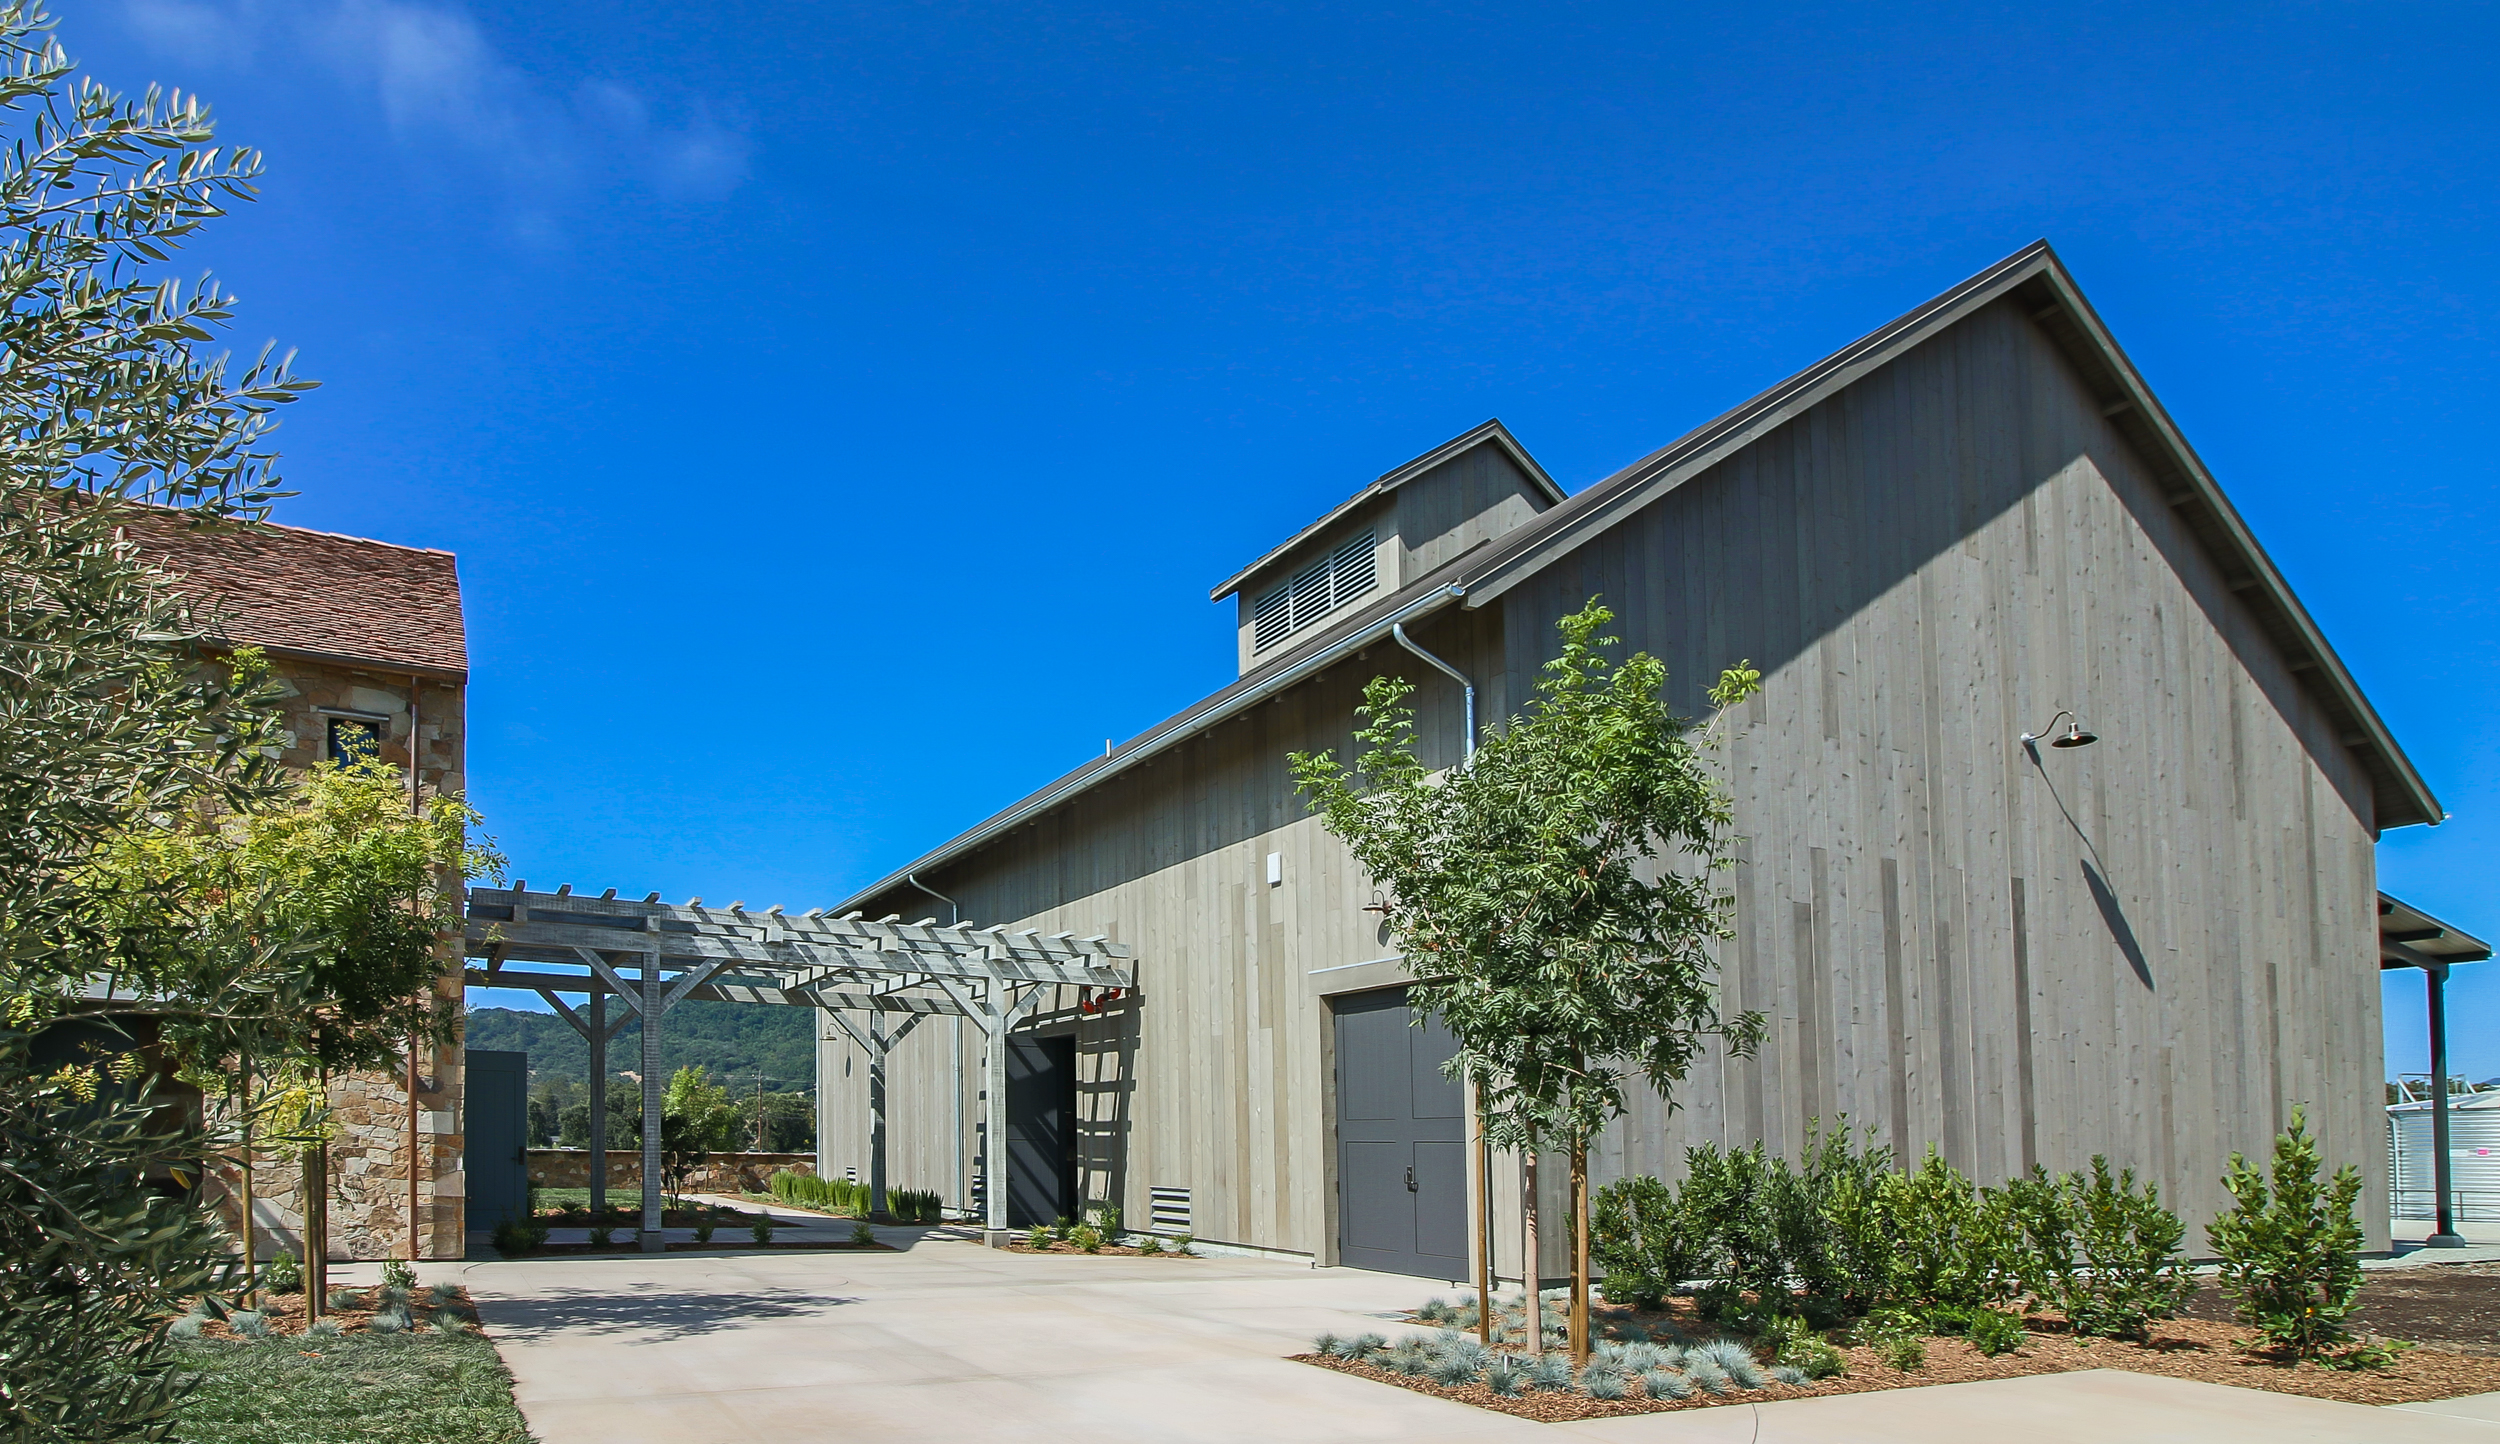 The Mira Winery Building